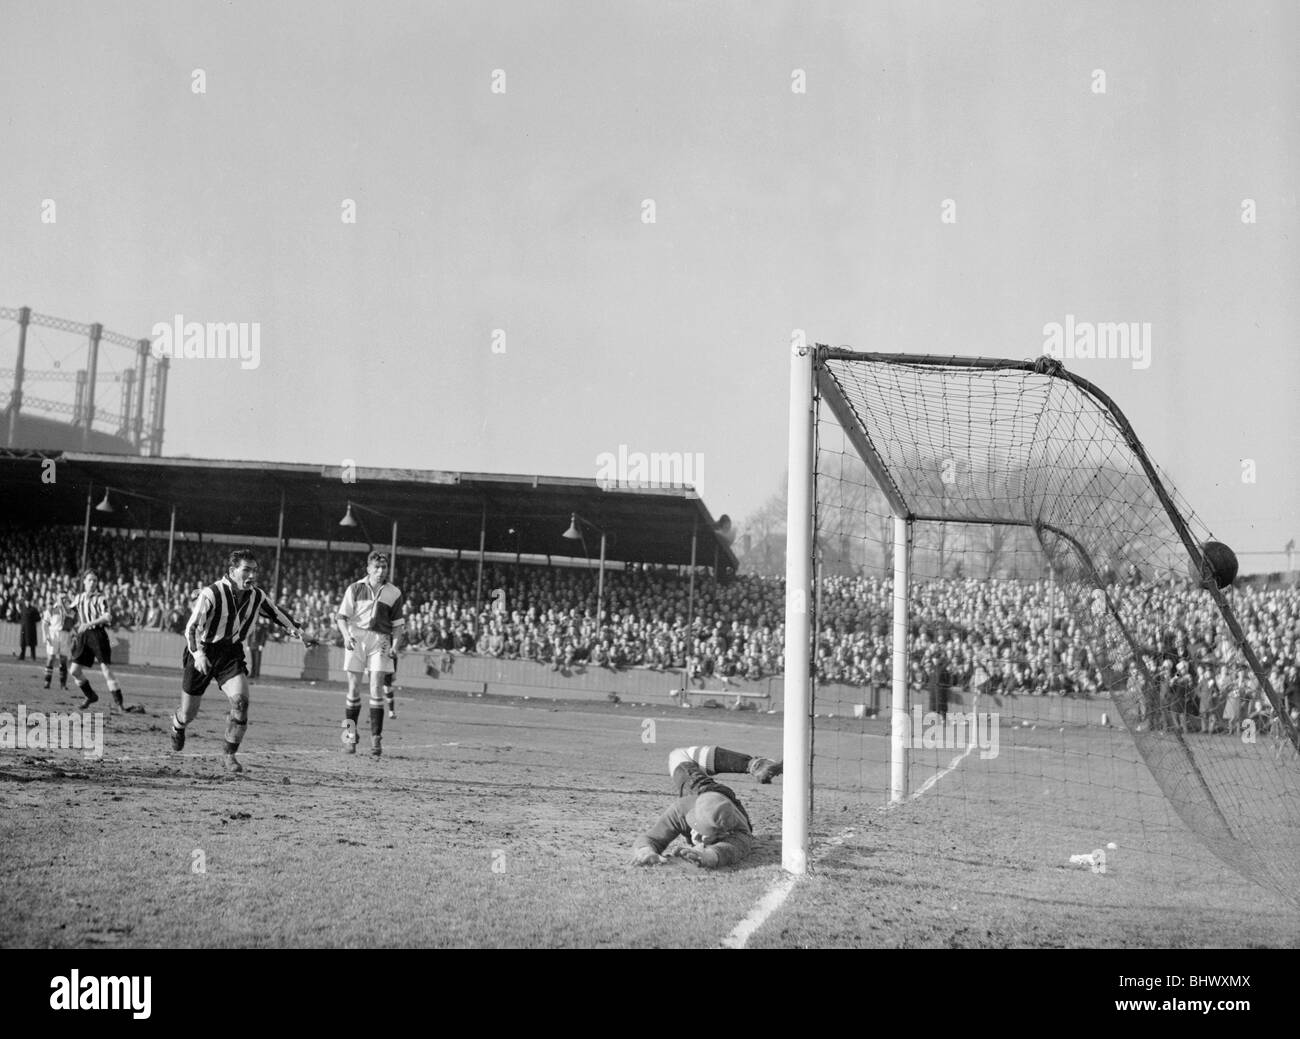 FA Cup Quarter Final Replay match at Eastville Stadium. Bristol Rovers 1 v Newcastle United 3. Newcastle's George Robledo in Stock Photo